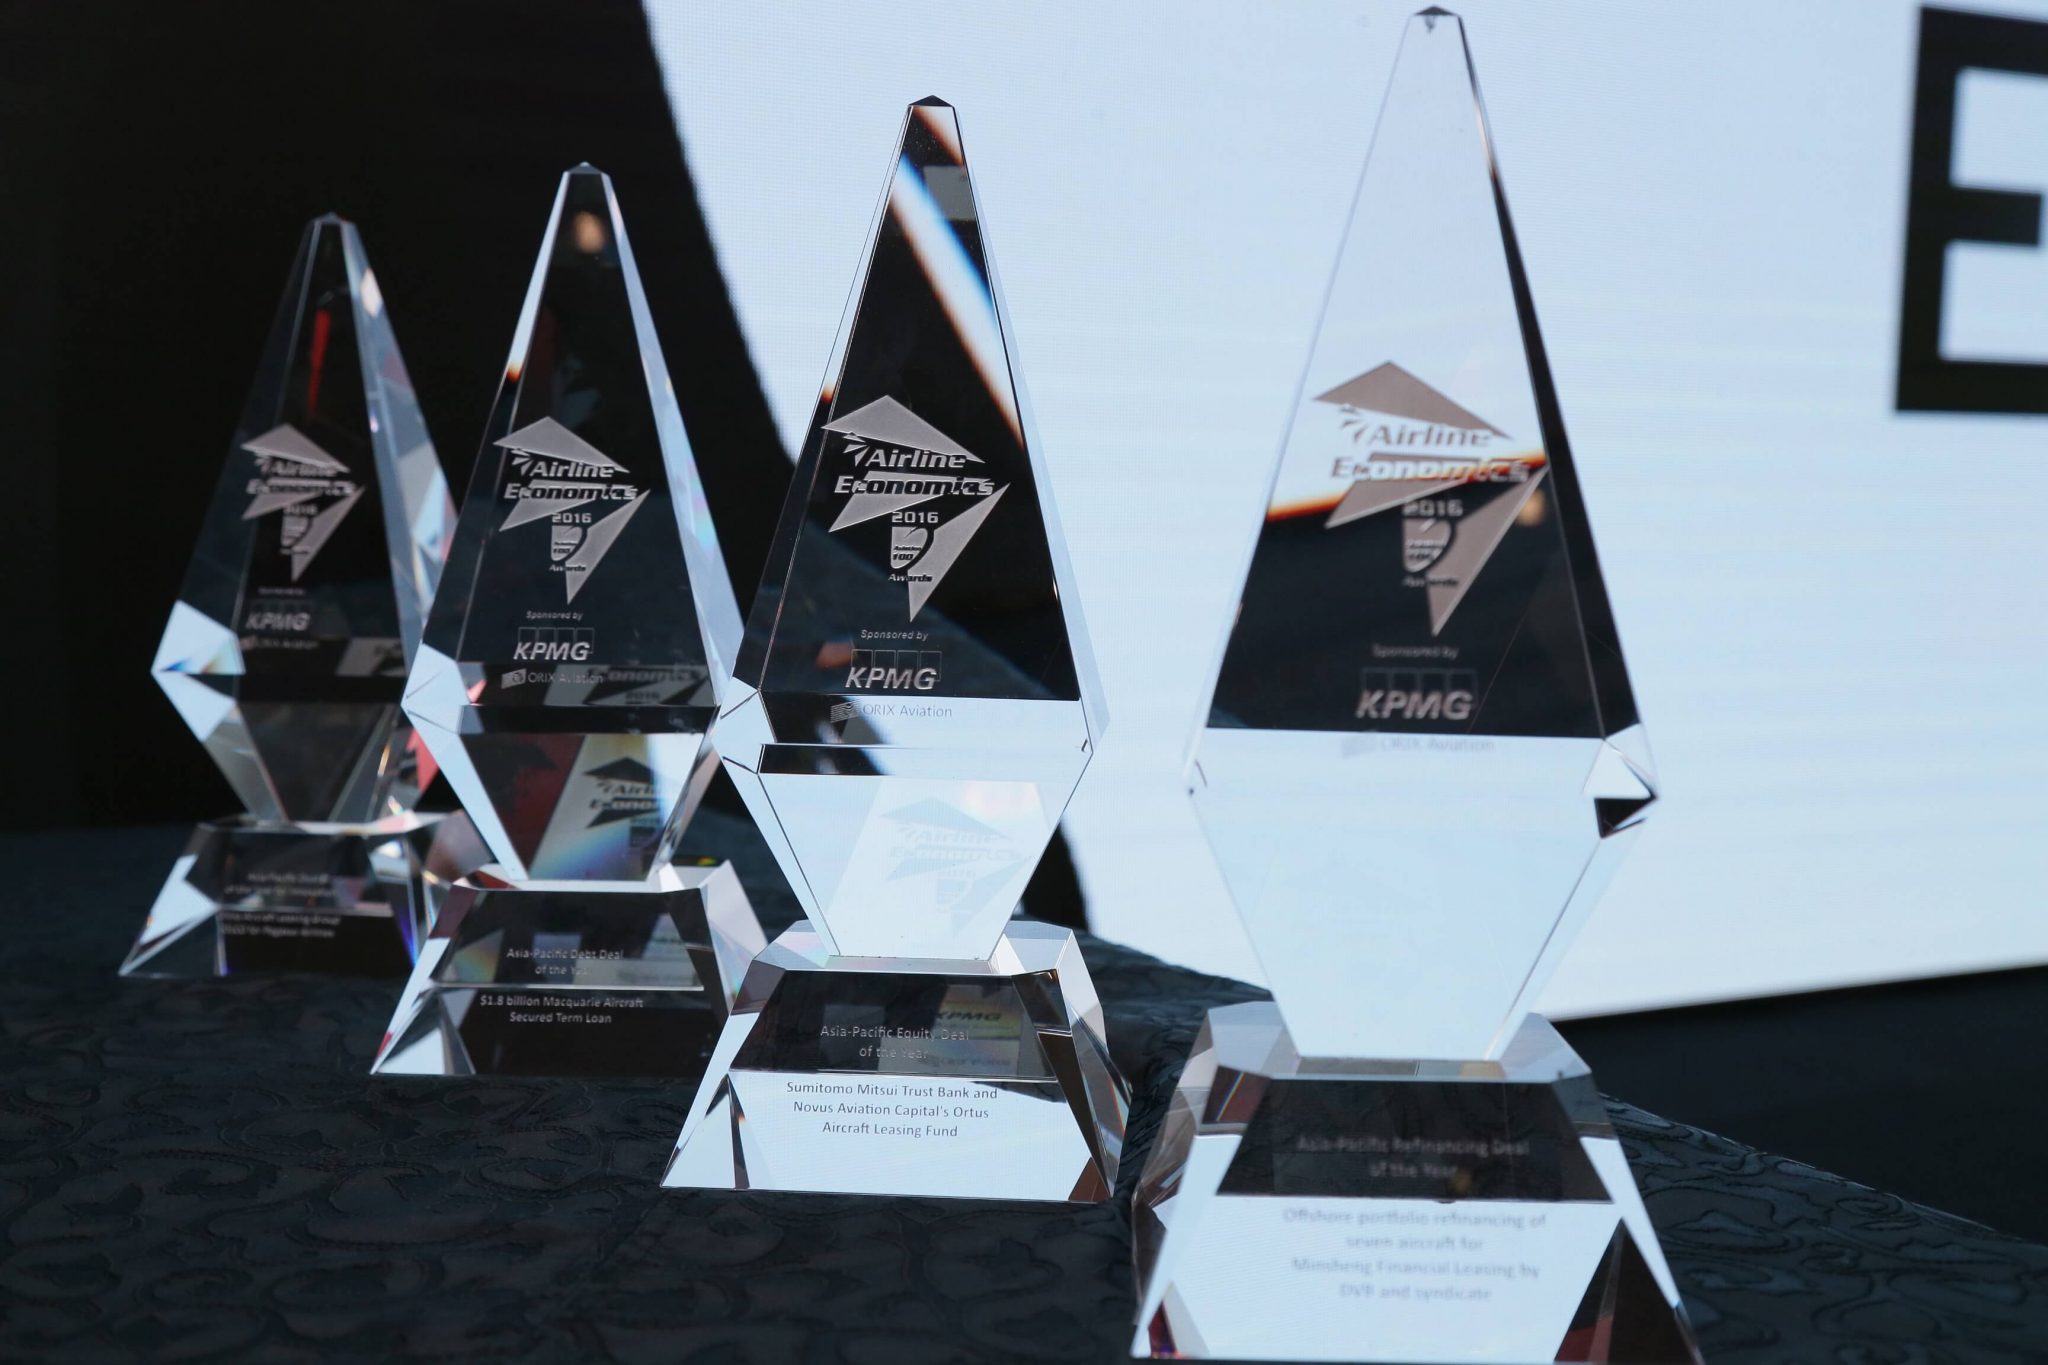 Airline Economics Growth Frontiers Dubai and the Aviation 100 Middle East & Africa award winners